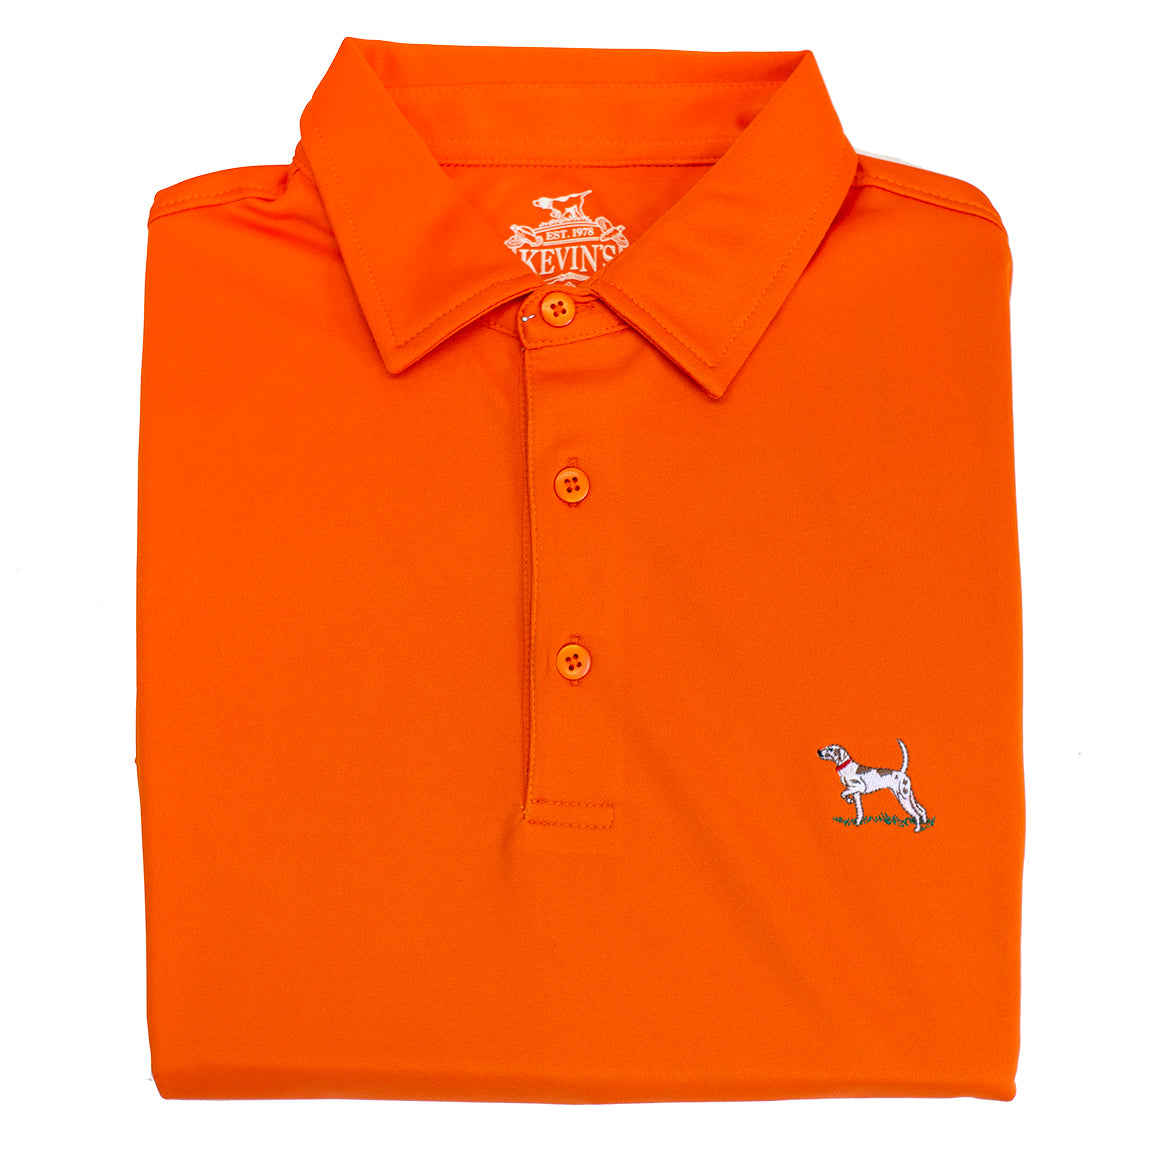 Kevin's Custom Pointer Stretch Performance Polo-MENS CLOTHING-ORANGE-S-Kevin's Fine Outdoor Gear & Apparel